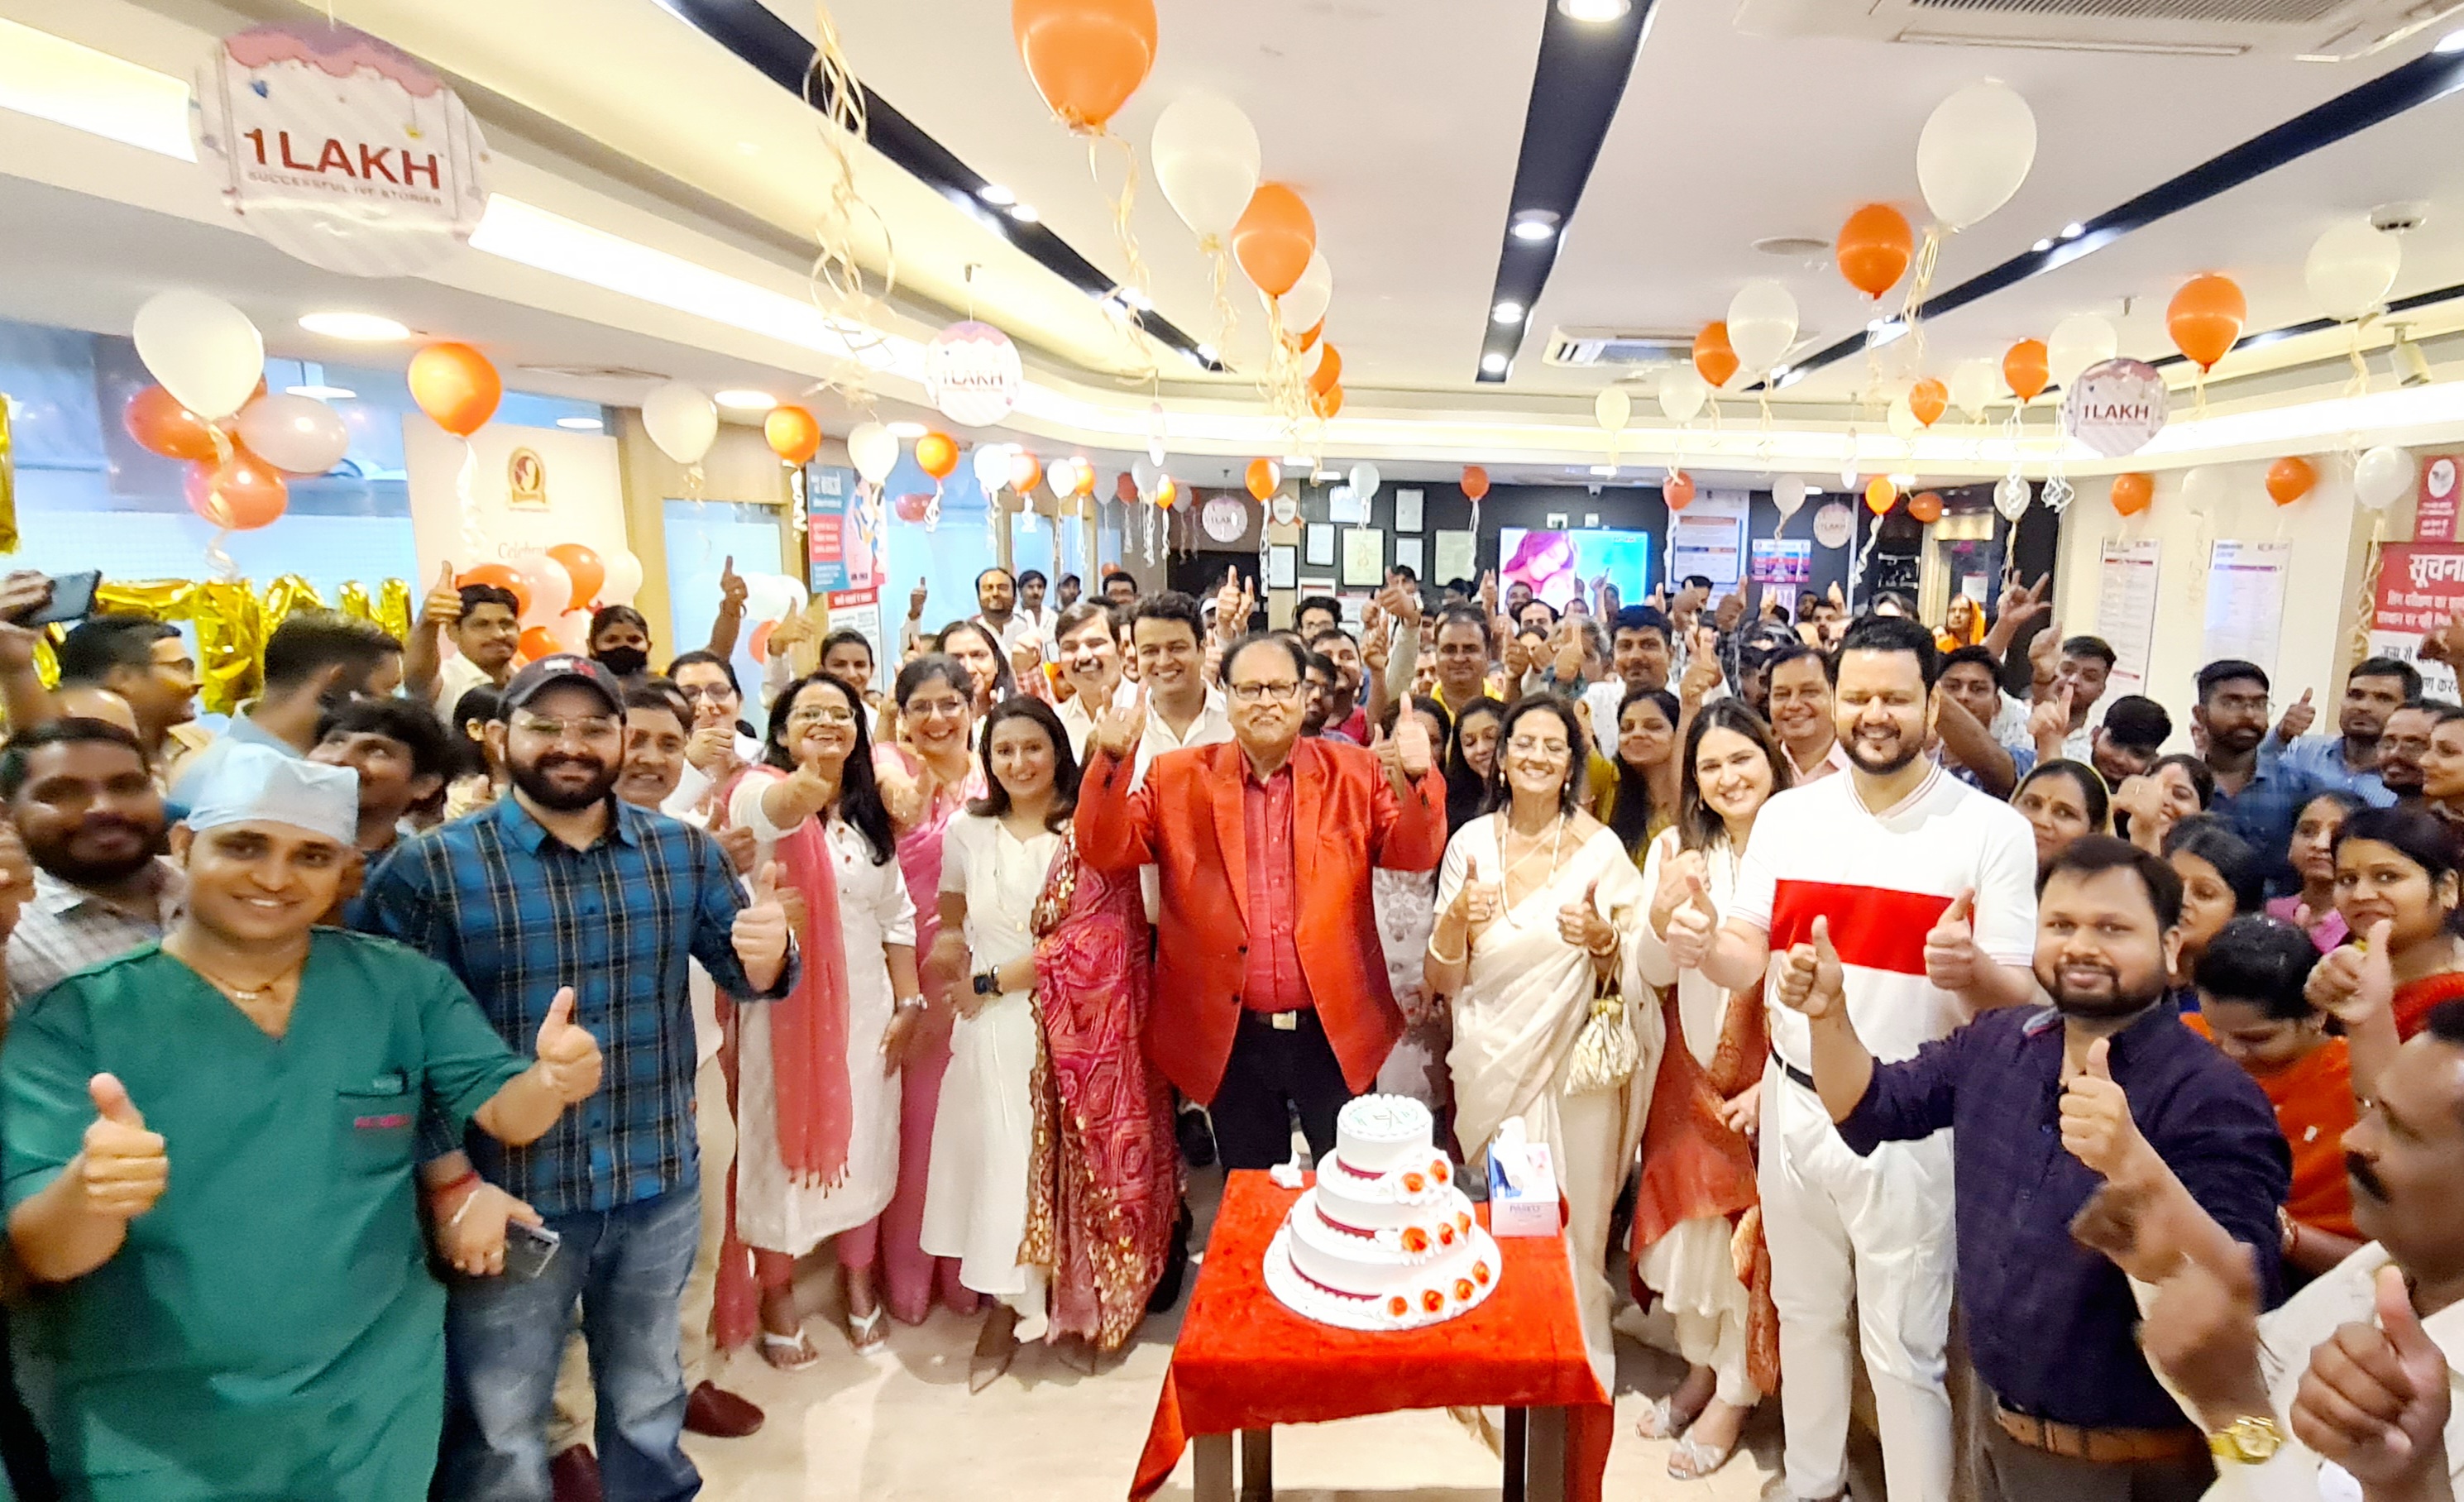 Indira IVF celebrated its 11th foundation day with great pomp